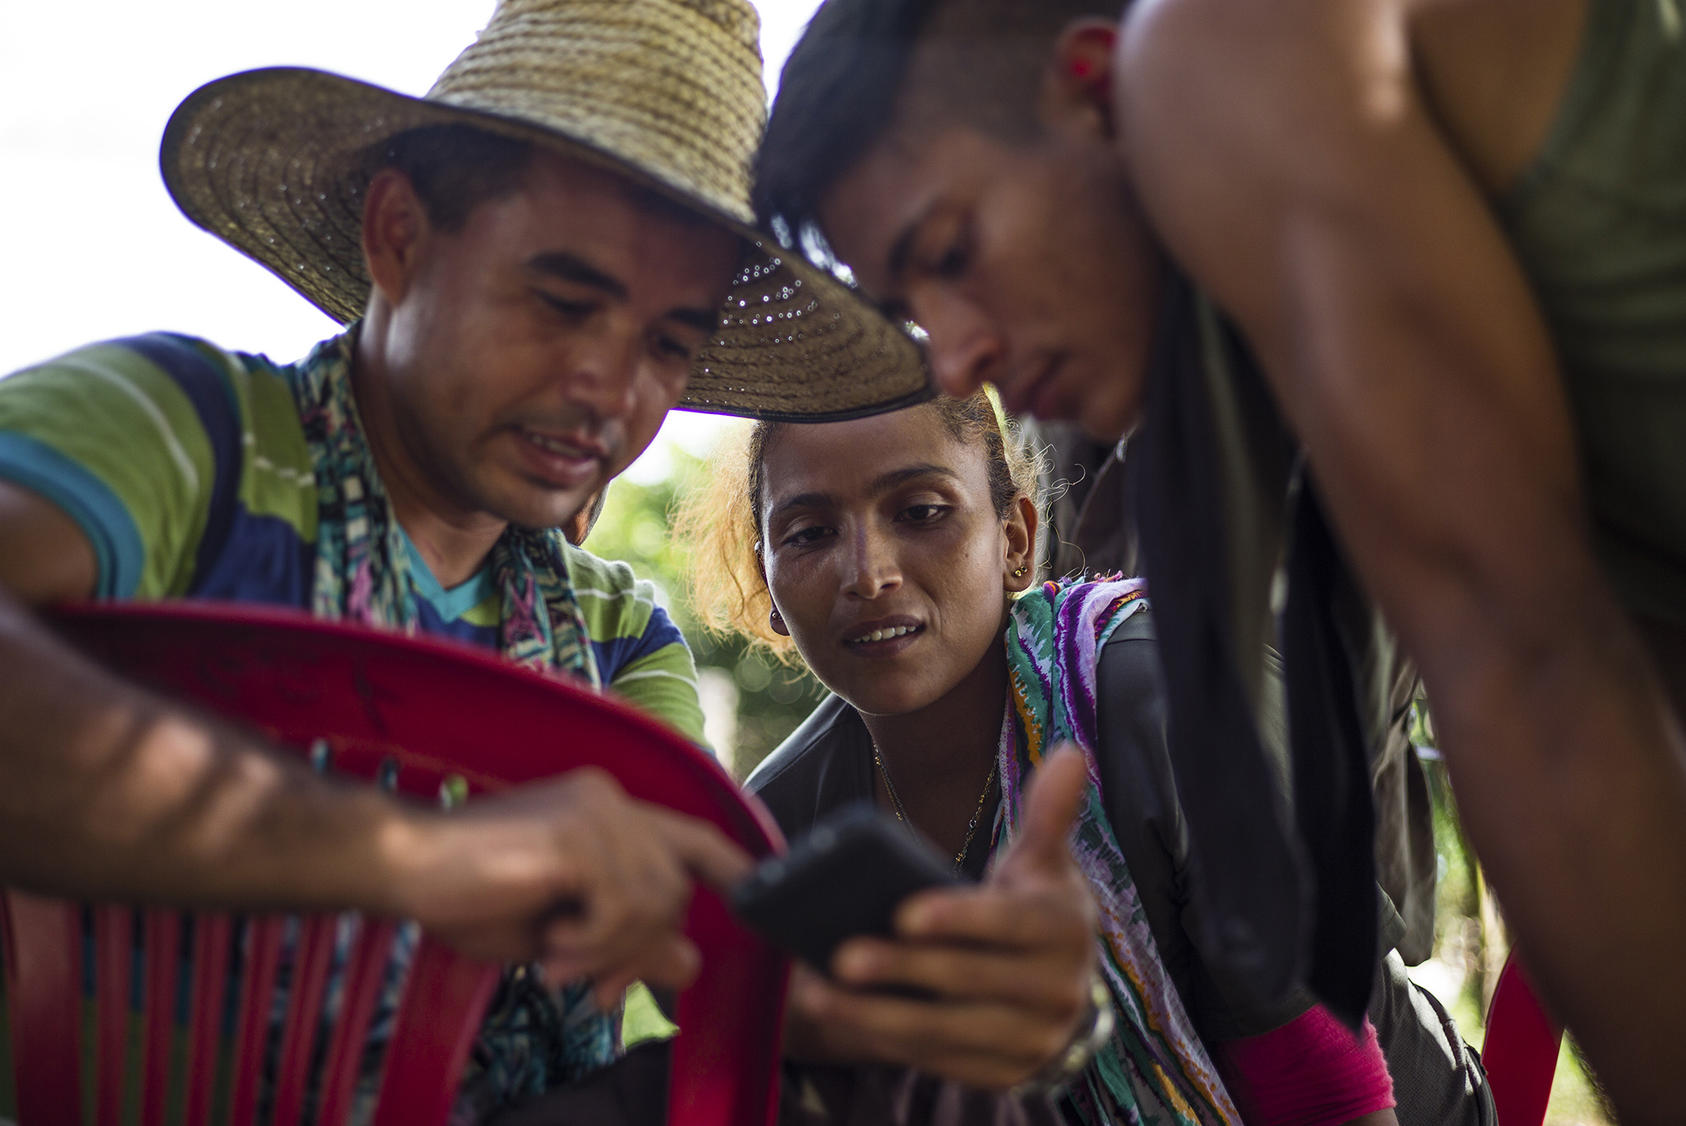 Members of the Revolutionary Armed Forces of Colombia look at photos on a mobile phone as they gathered on the eve of a historic armistice in San Vicente del Caguán on September 16, 2016. (Federico Rios Escobar/New York Times)